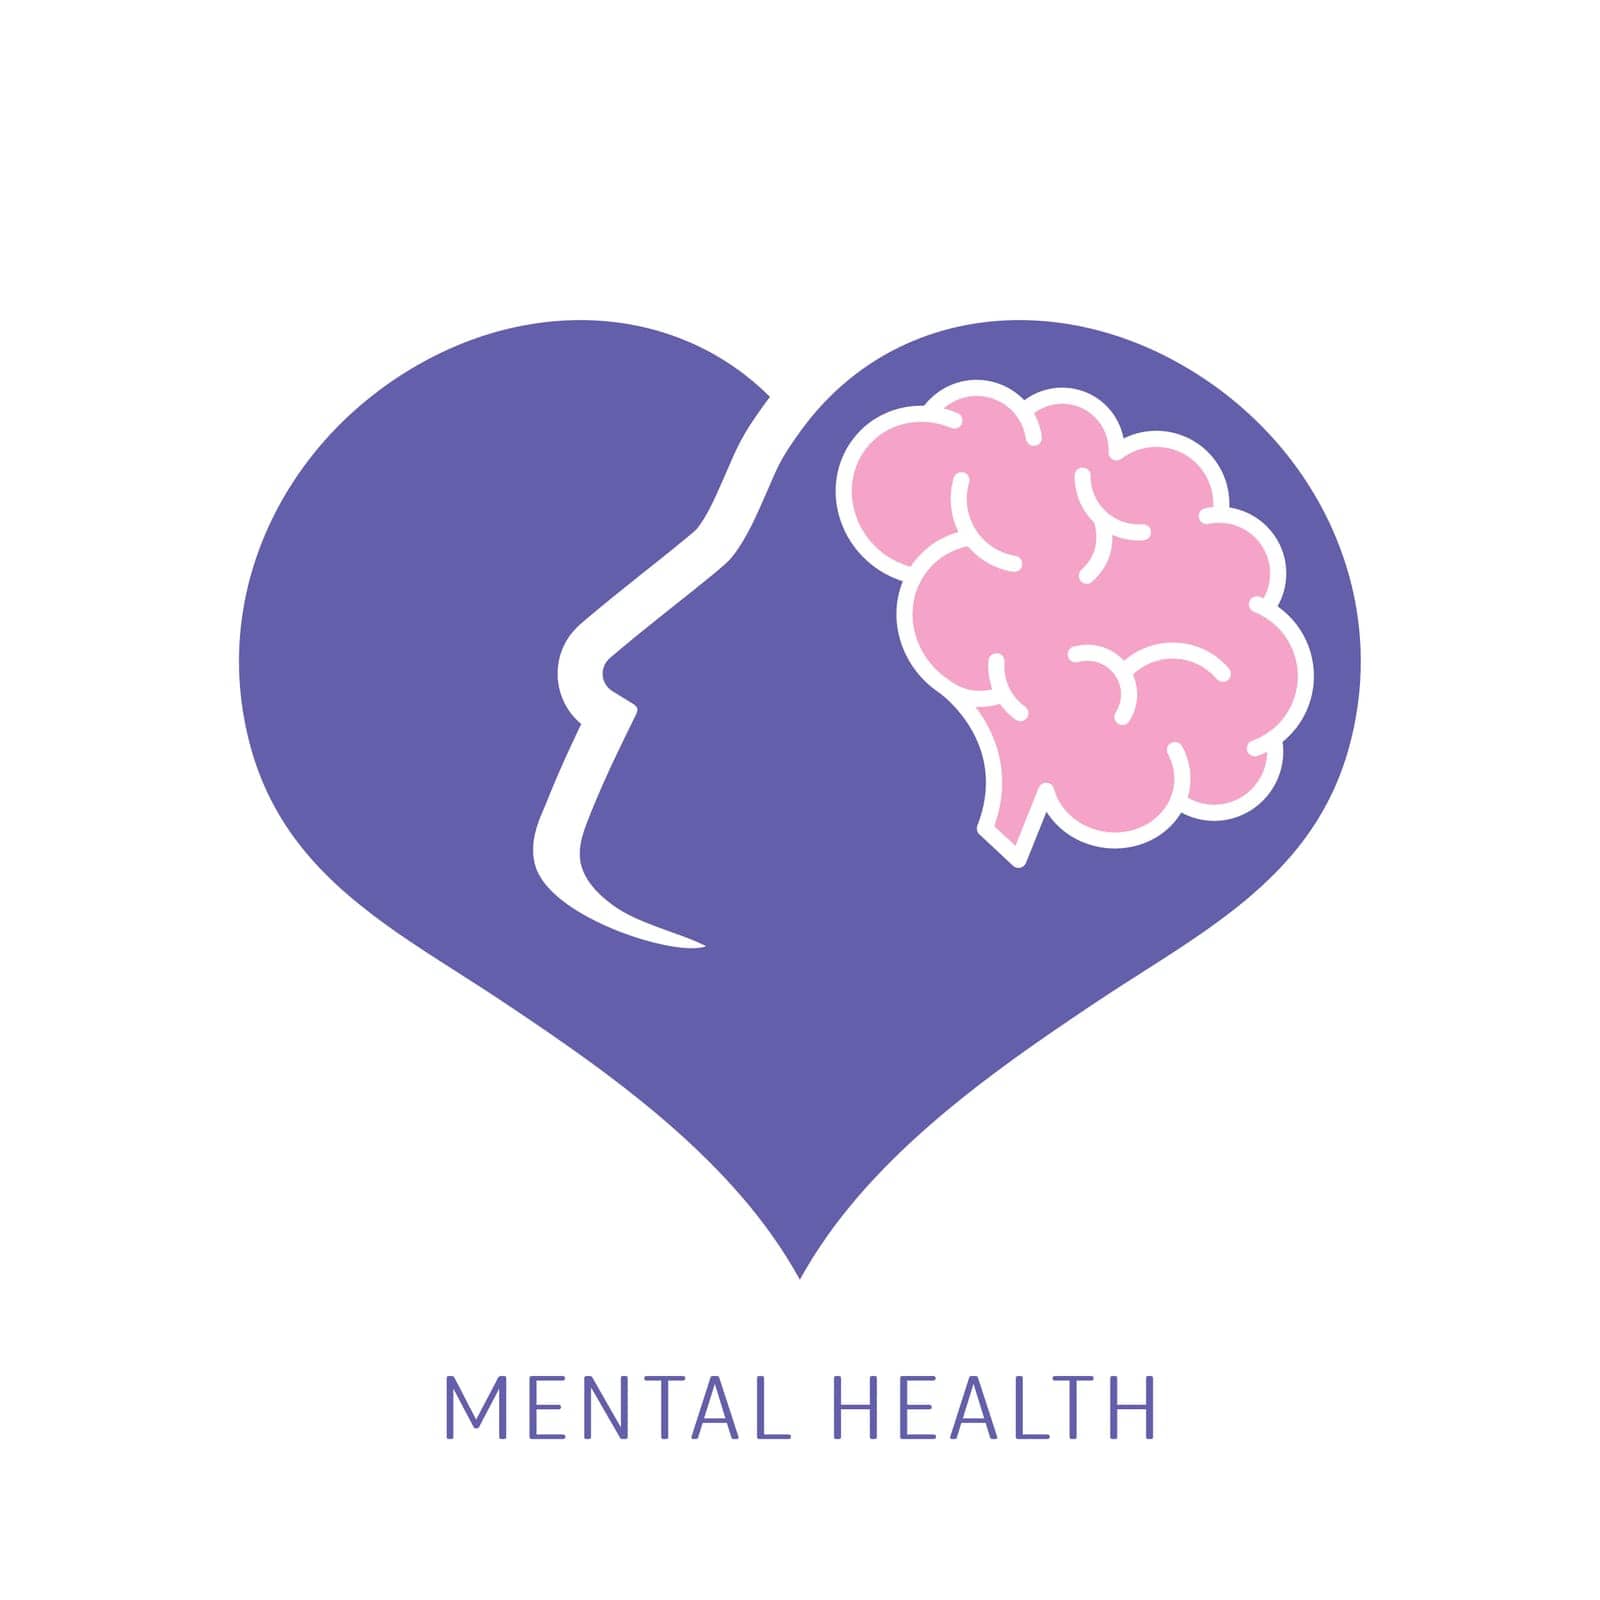 Head and heart combined shapes, with brain icon inside. A symbolic illustration representing the connection between the brain and mind in a conceptual and iconic way. Mental health awareness icon.